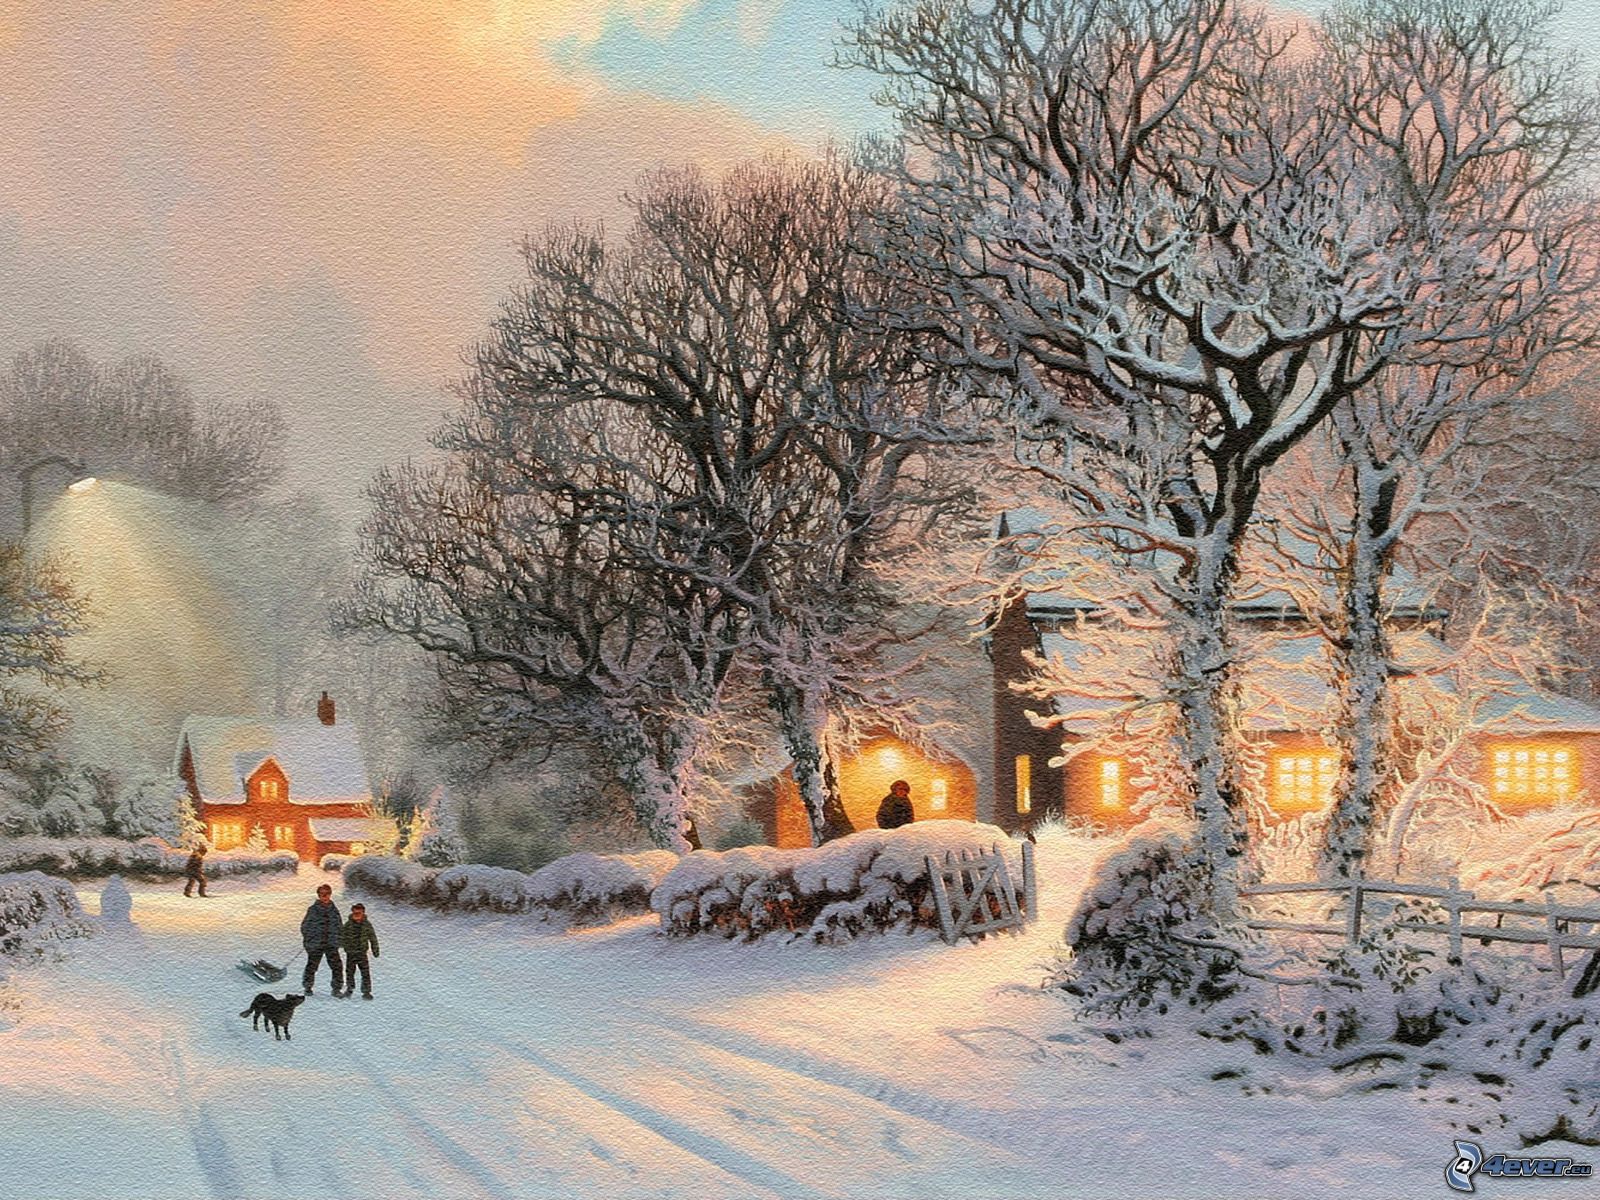 Snowy Village Snow Covered Road People Trees Cartoon